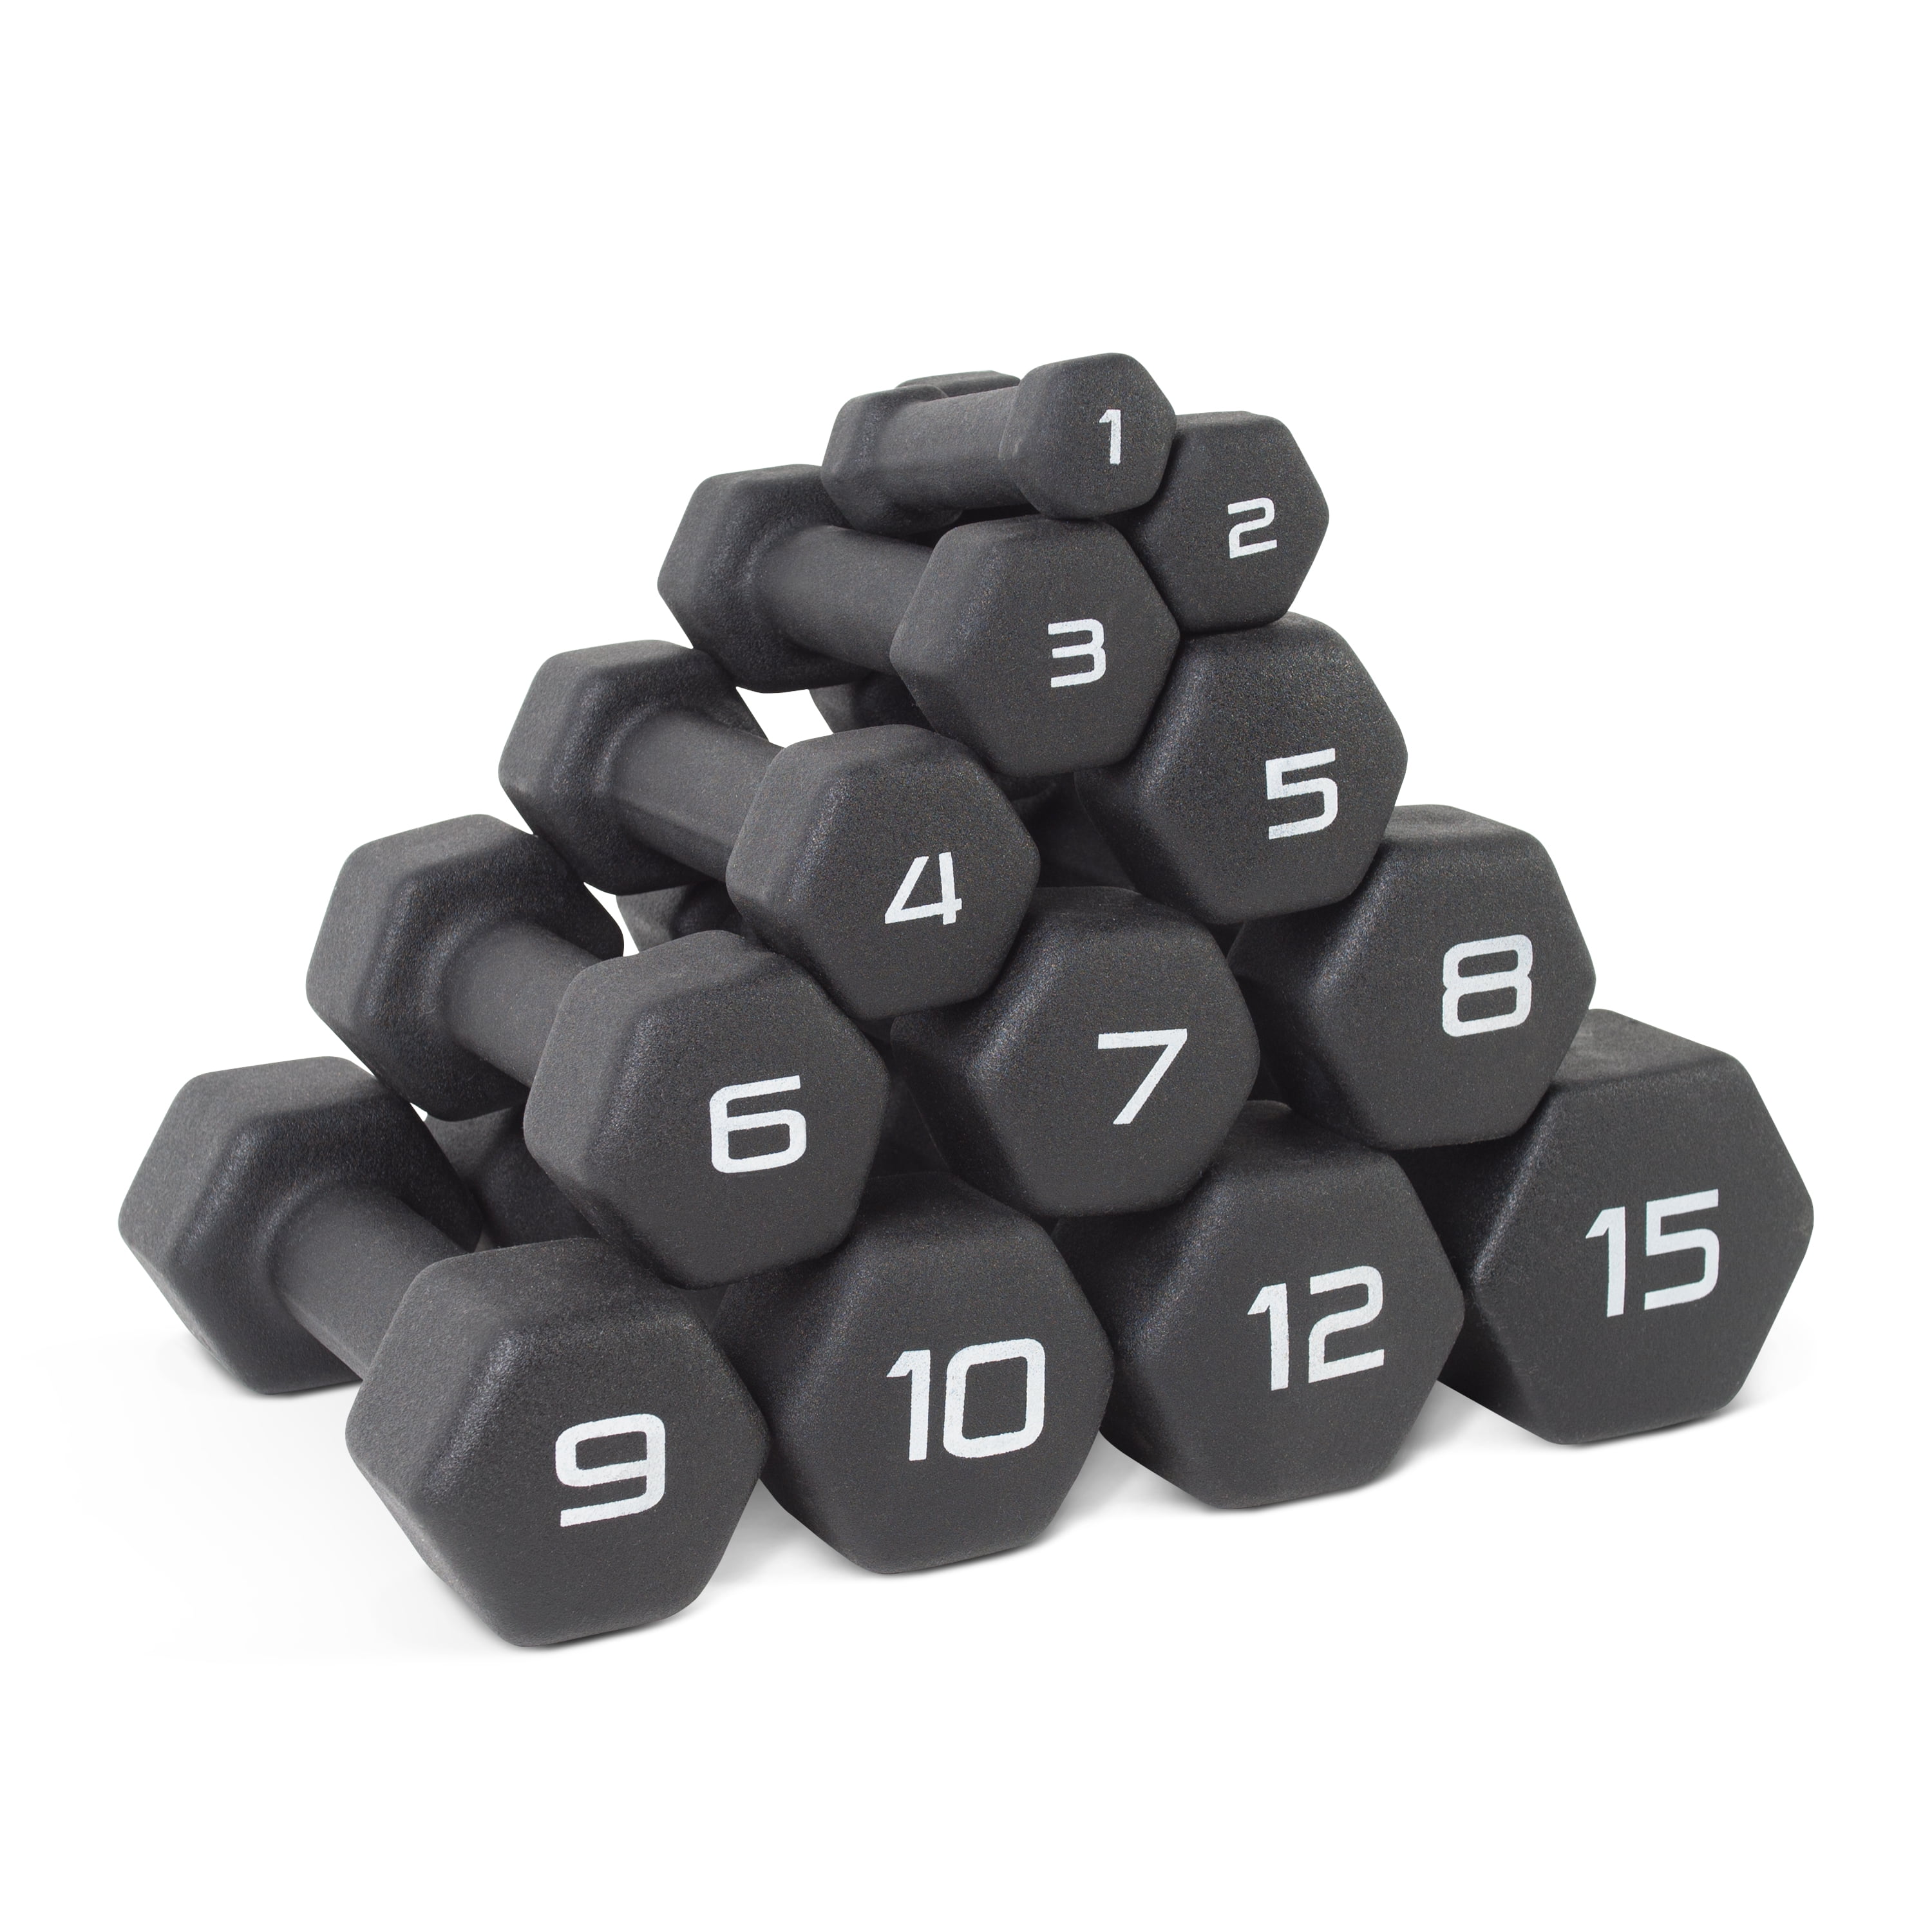 2LB Set Rubber Cap Neoprene Dumbbell Weights Fitness Never Used⚡️FAST SHIPPING⚡️ 